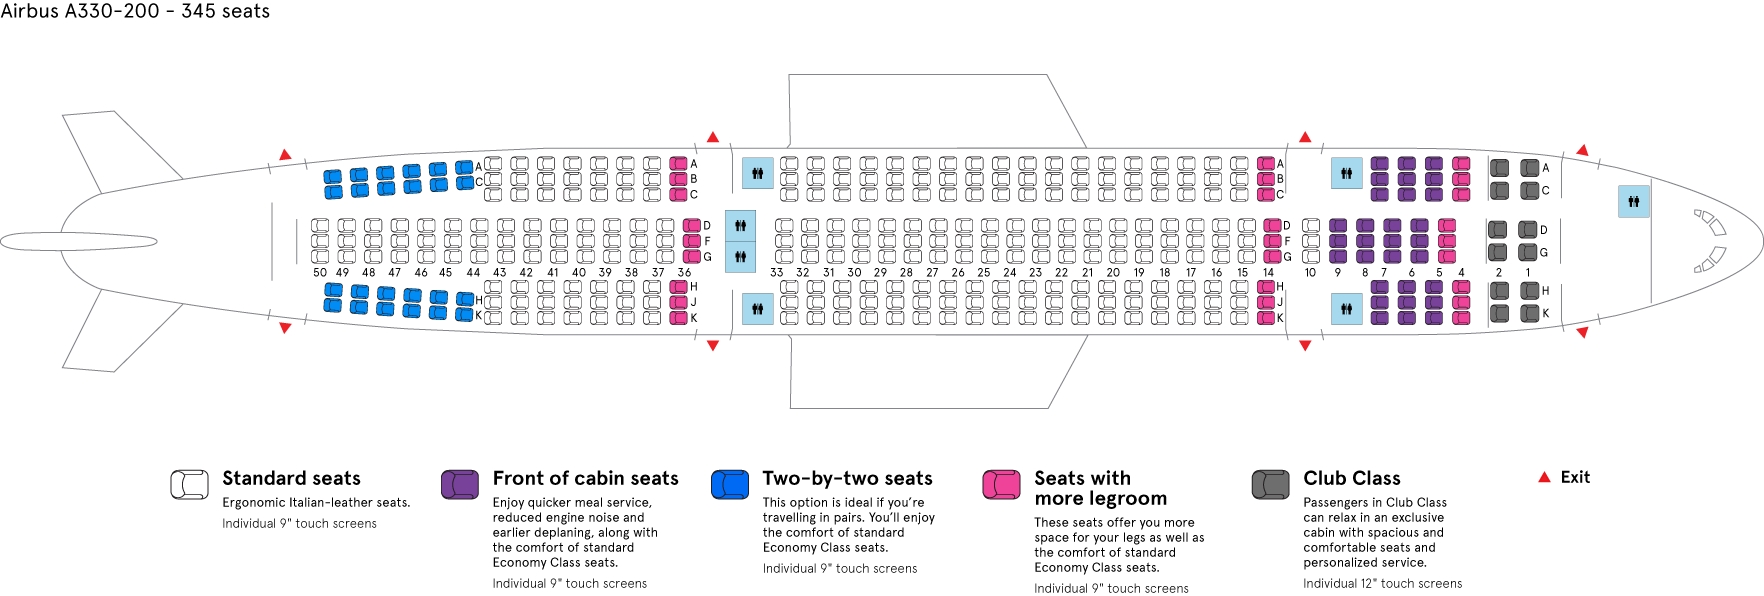 Seat Map Airbus A330 200 Air France Best Seats In Plane Images And